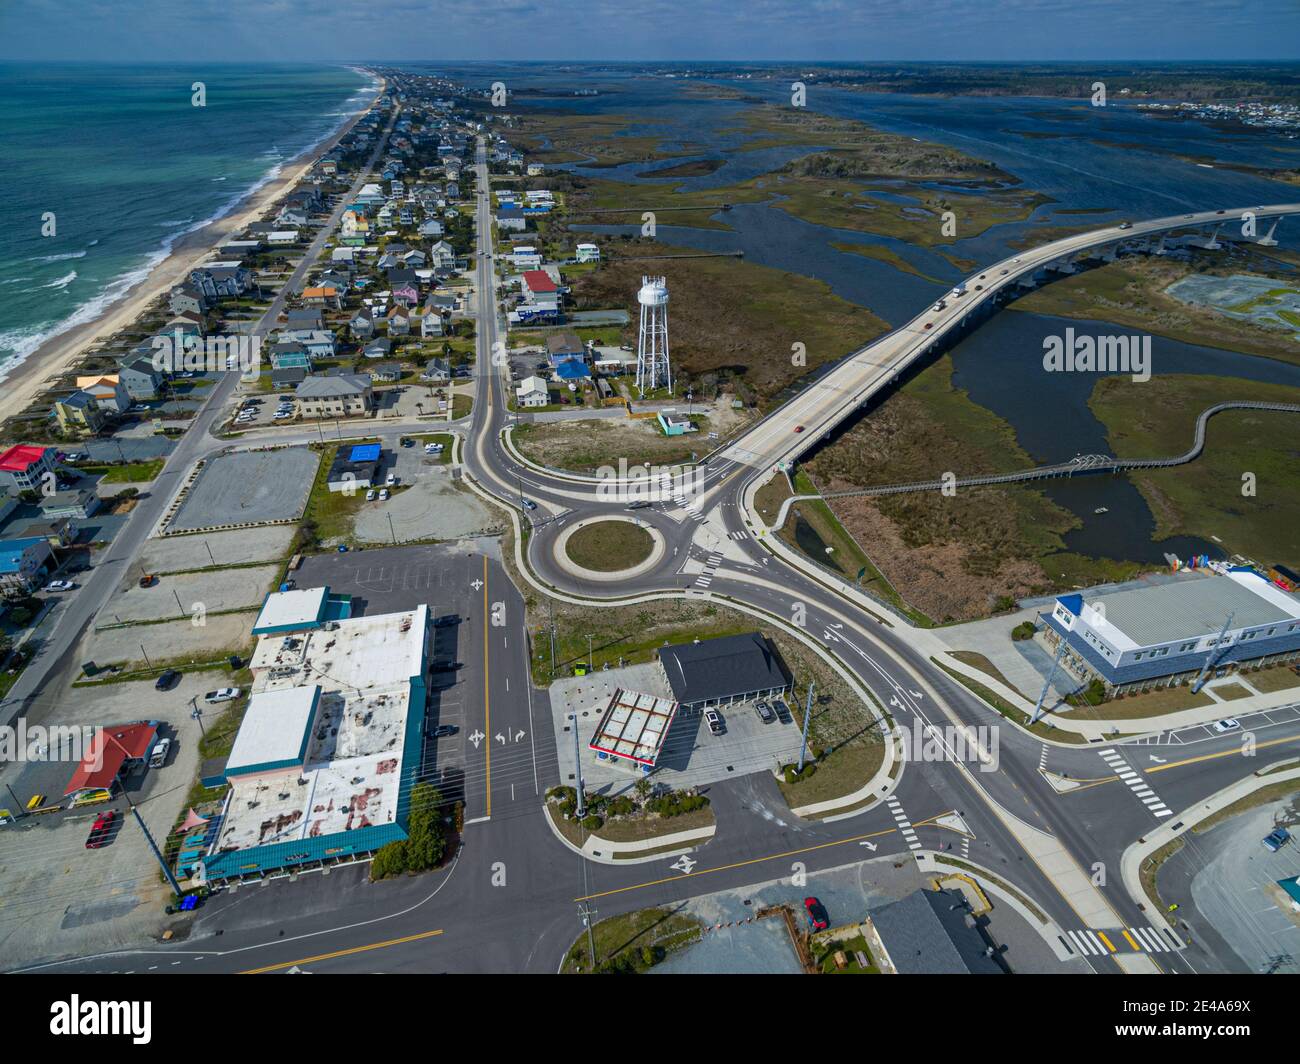 Aerial View of Traffic Circle in Surf City, NC on Topsail Island Stock Photo